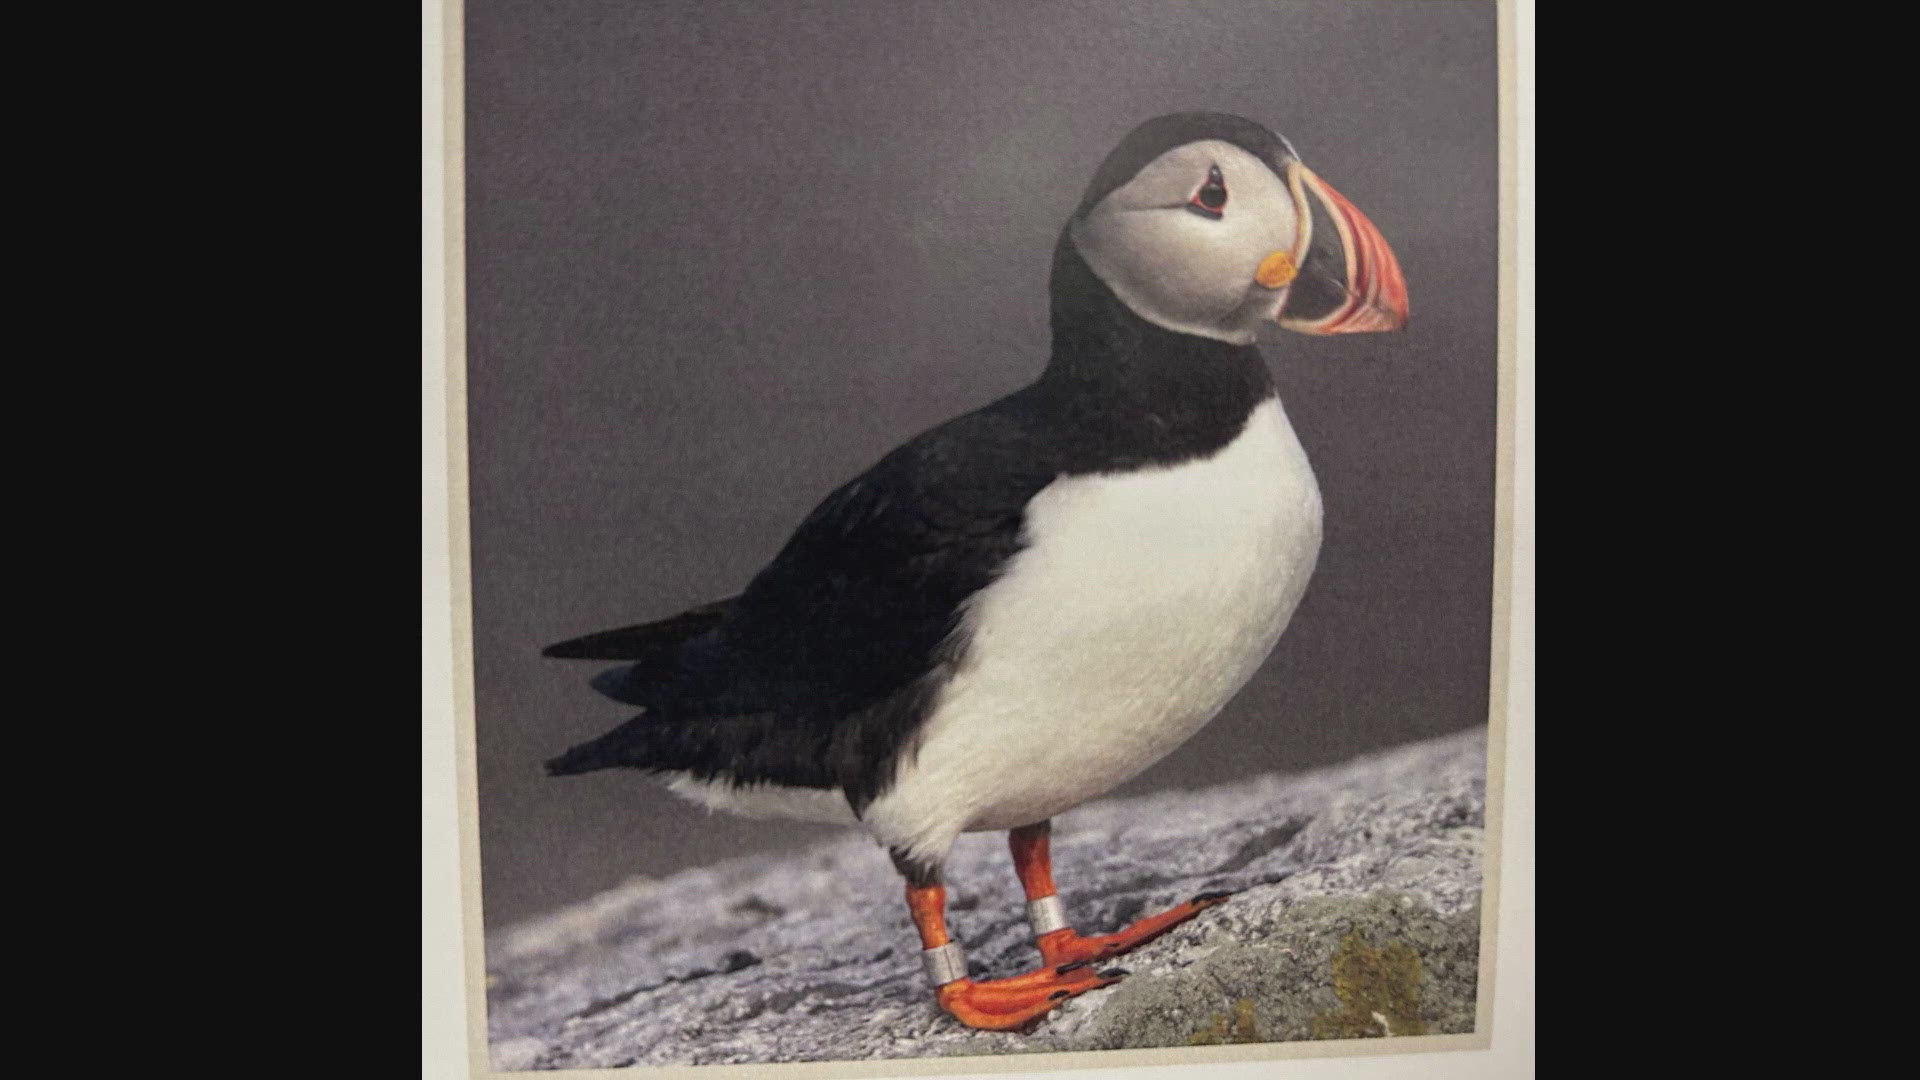 This year, NEWS CENTER Maine is "adopting" a puffin through the program. Anyone can do it!